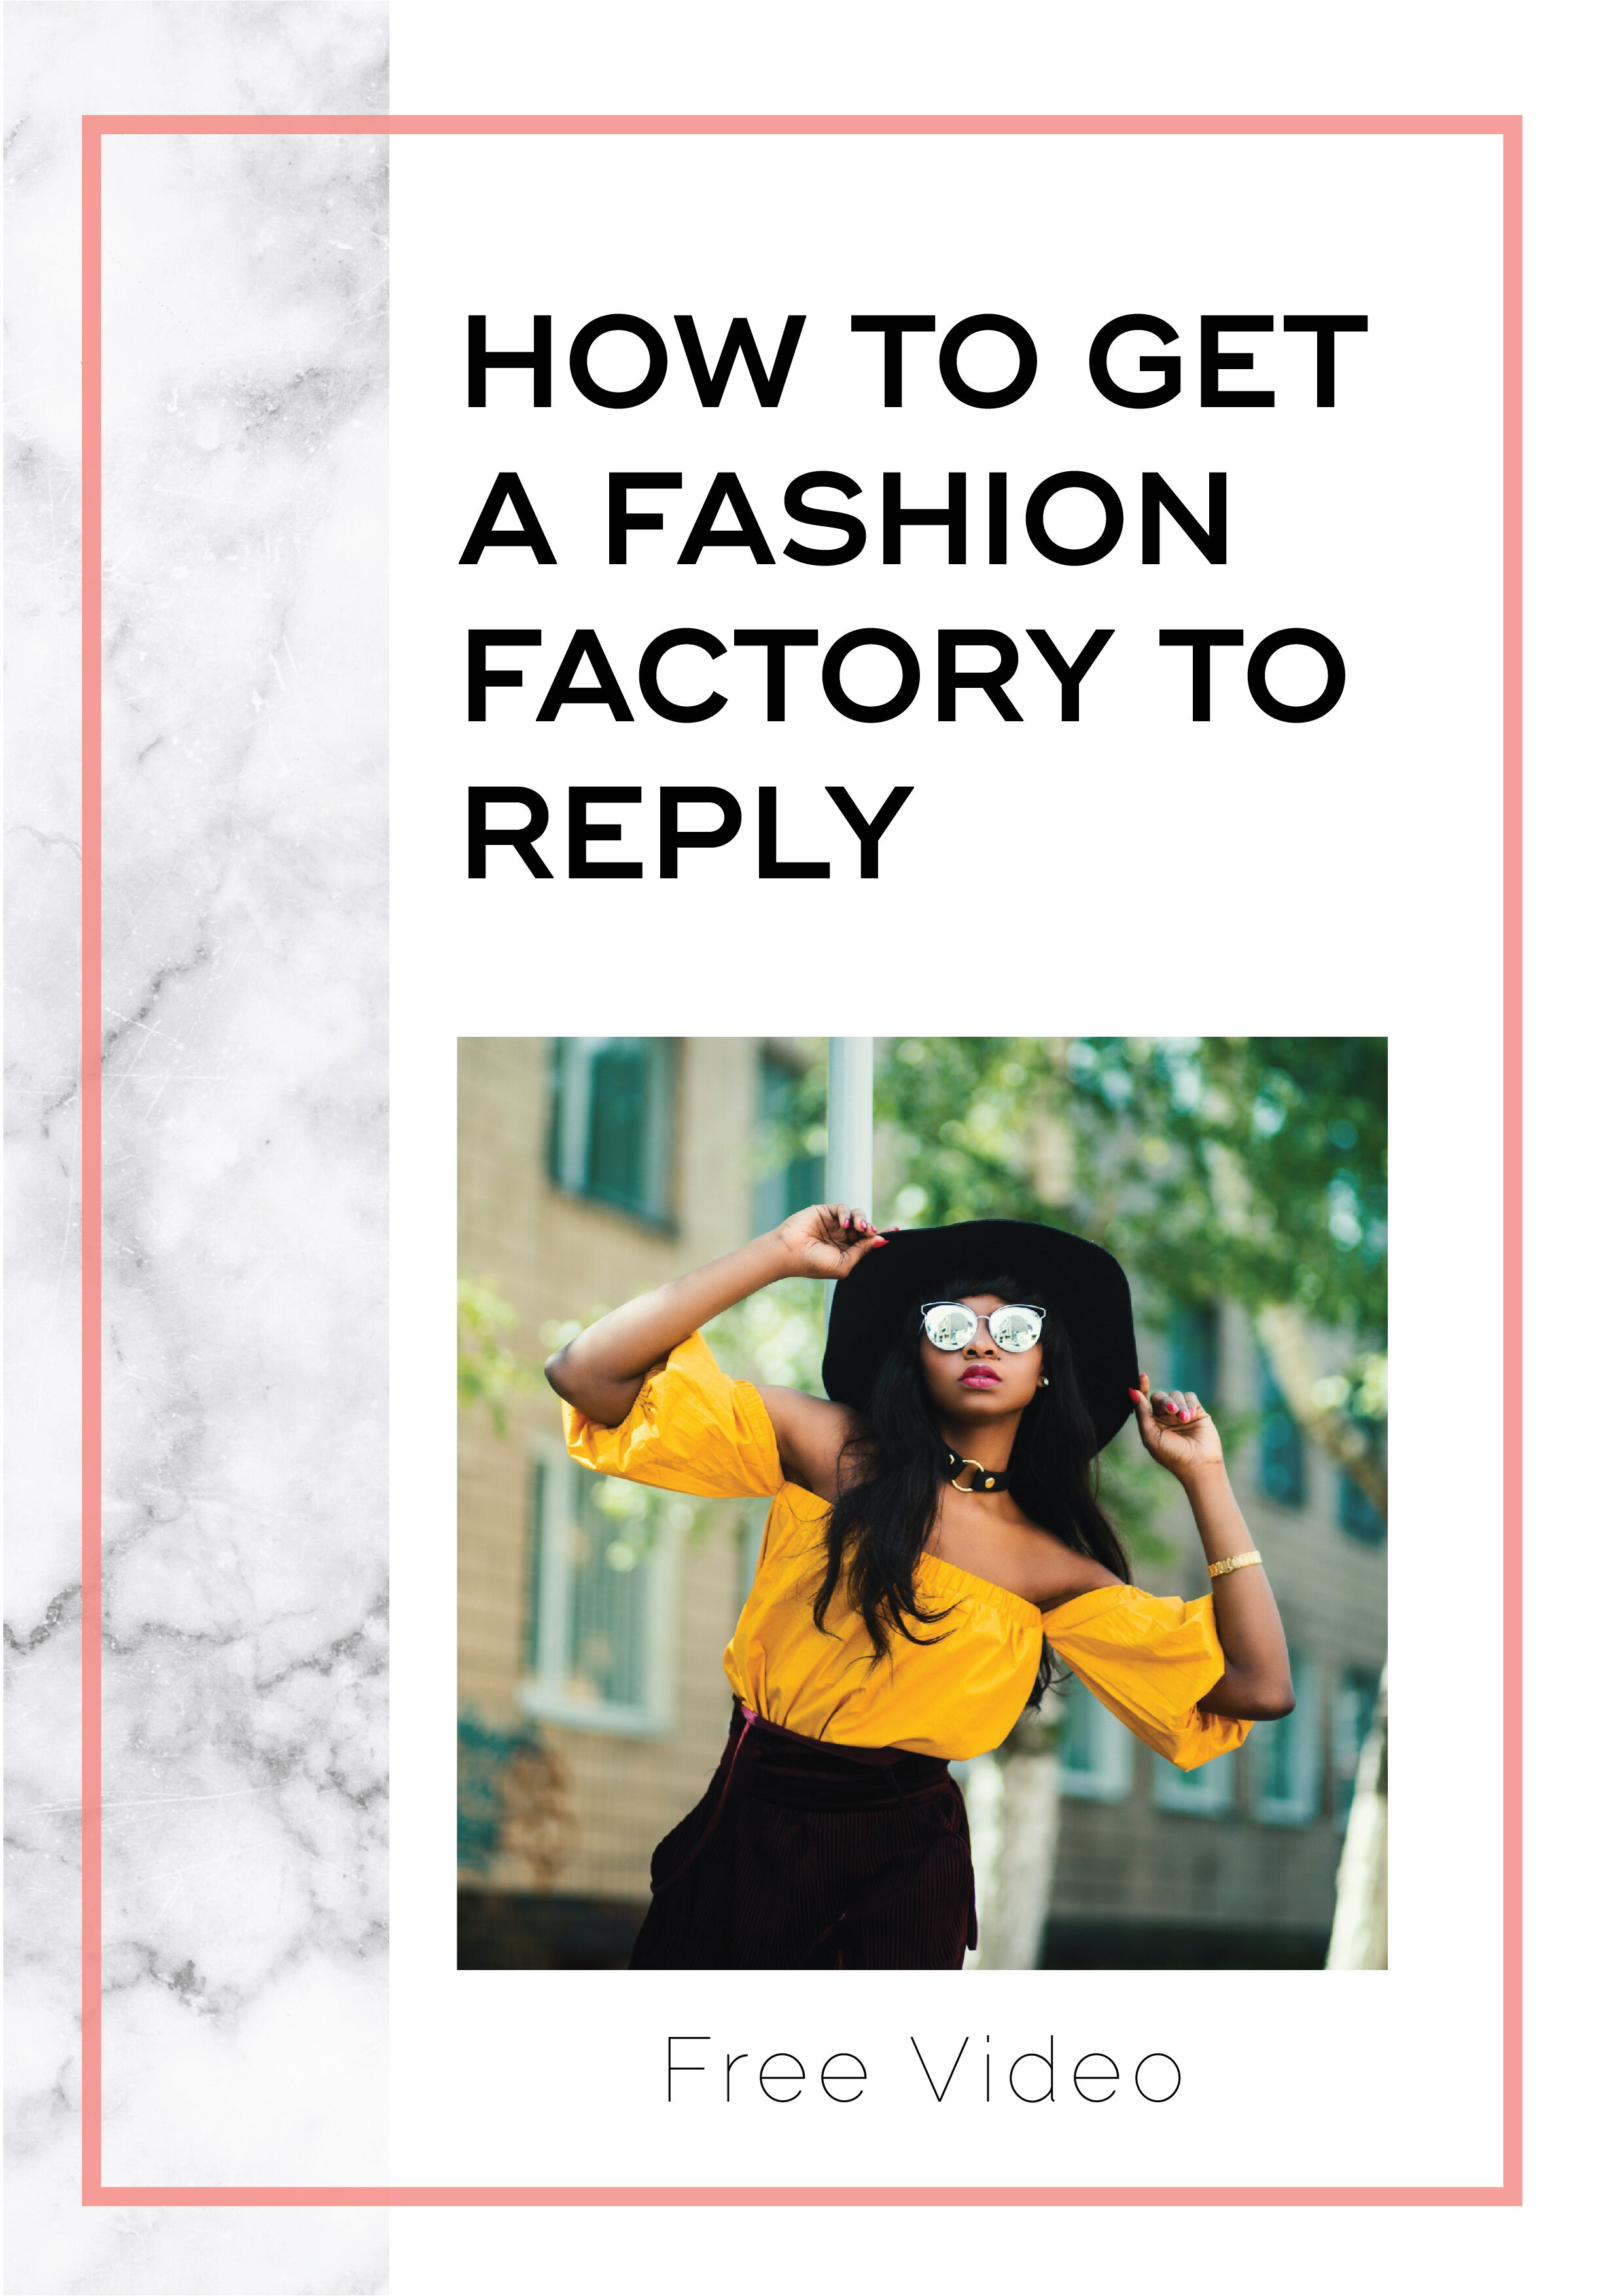 How to Get a Fashion Factory to Reply Video.jpg